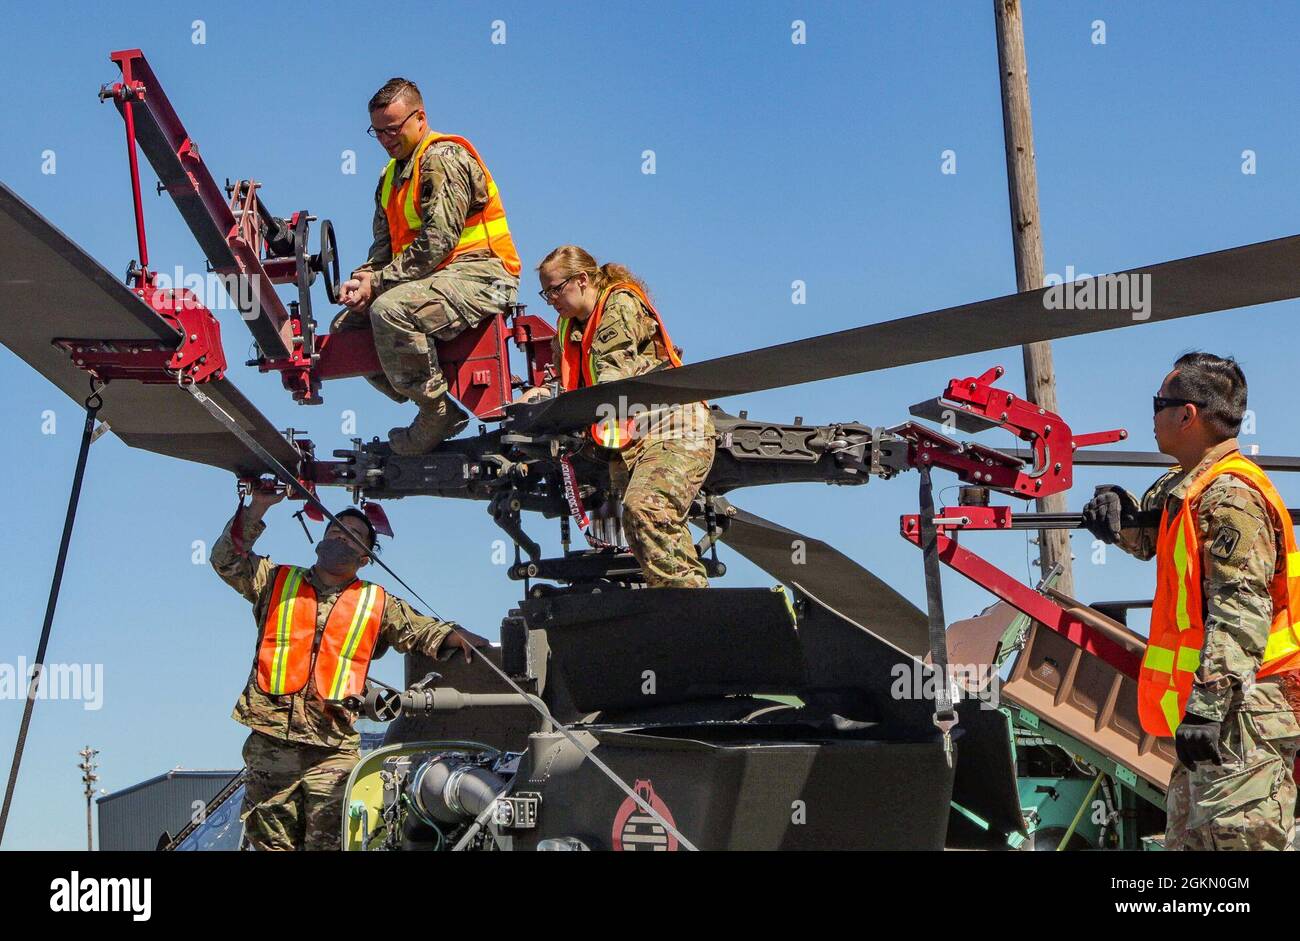 Soldiers assigned to 46th Aviation Support Battalion, 16th Combat Aviation Brigade, prepare an AH-64 attack helicopter for shipment at the Port of Tacoma, Wash., on Jun. 1, 2021.  The unit was preparing aircraft and equipment to be loaded onto a vessel for transport to a training exercise. Stock Photo